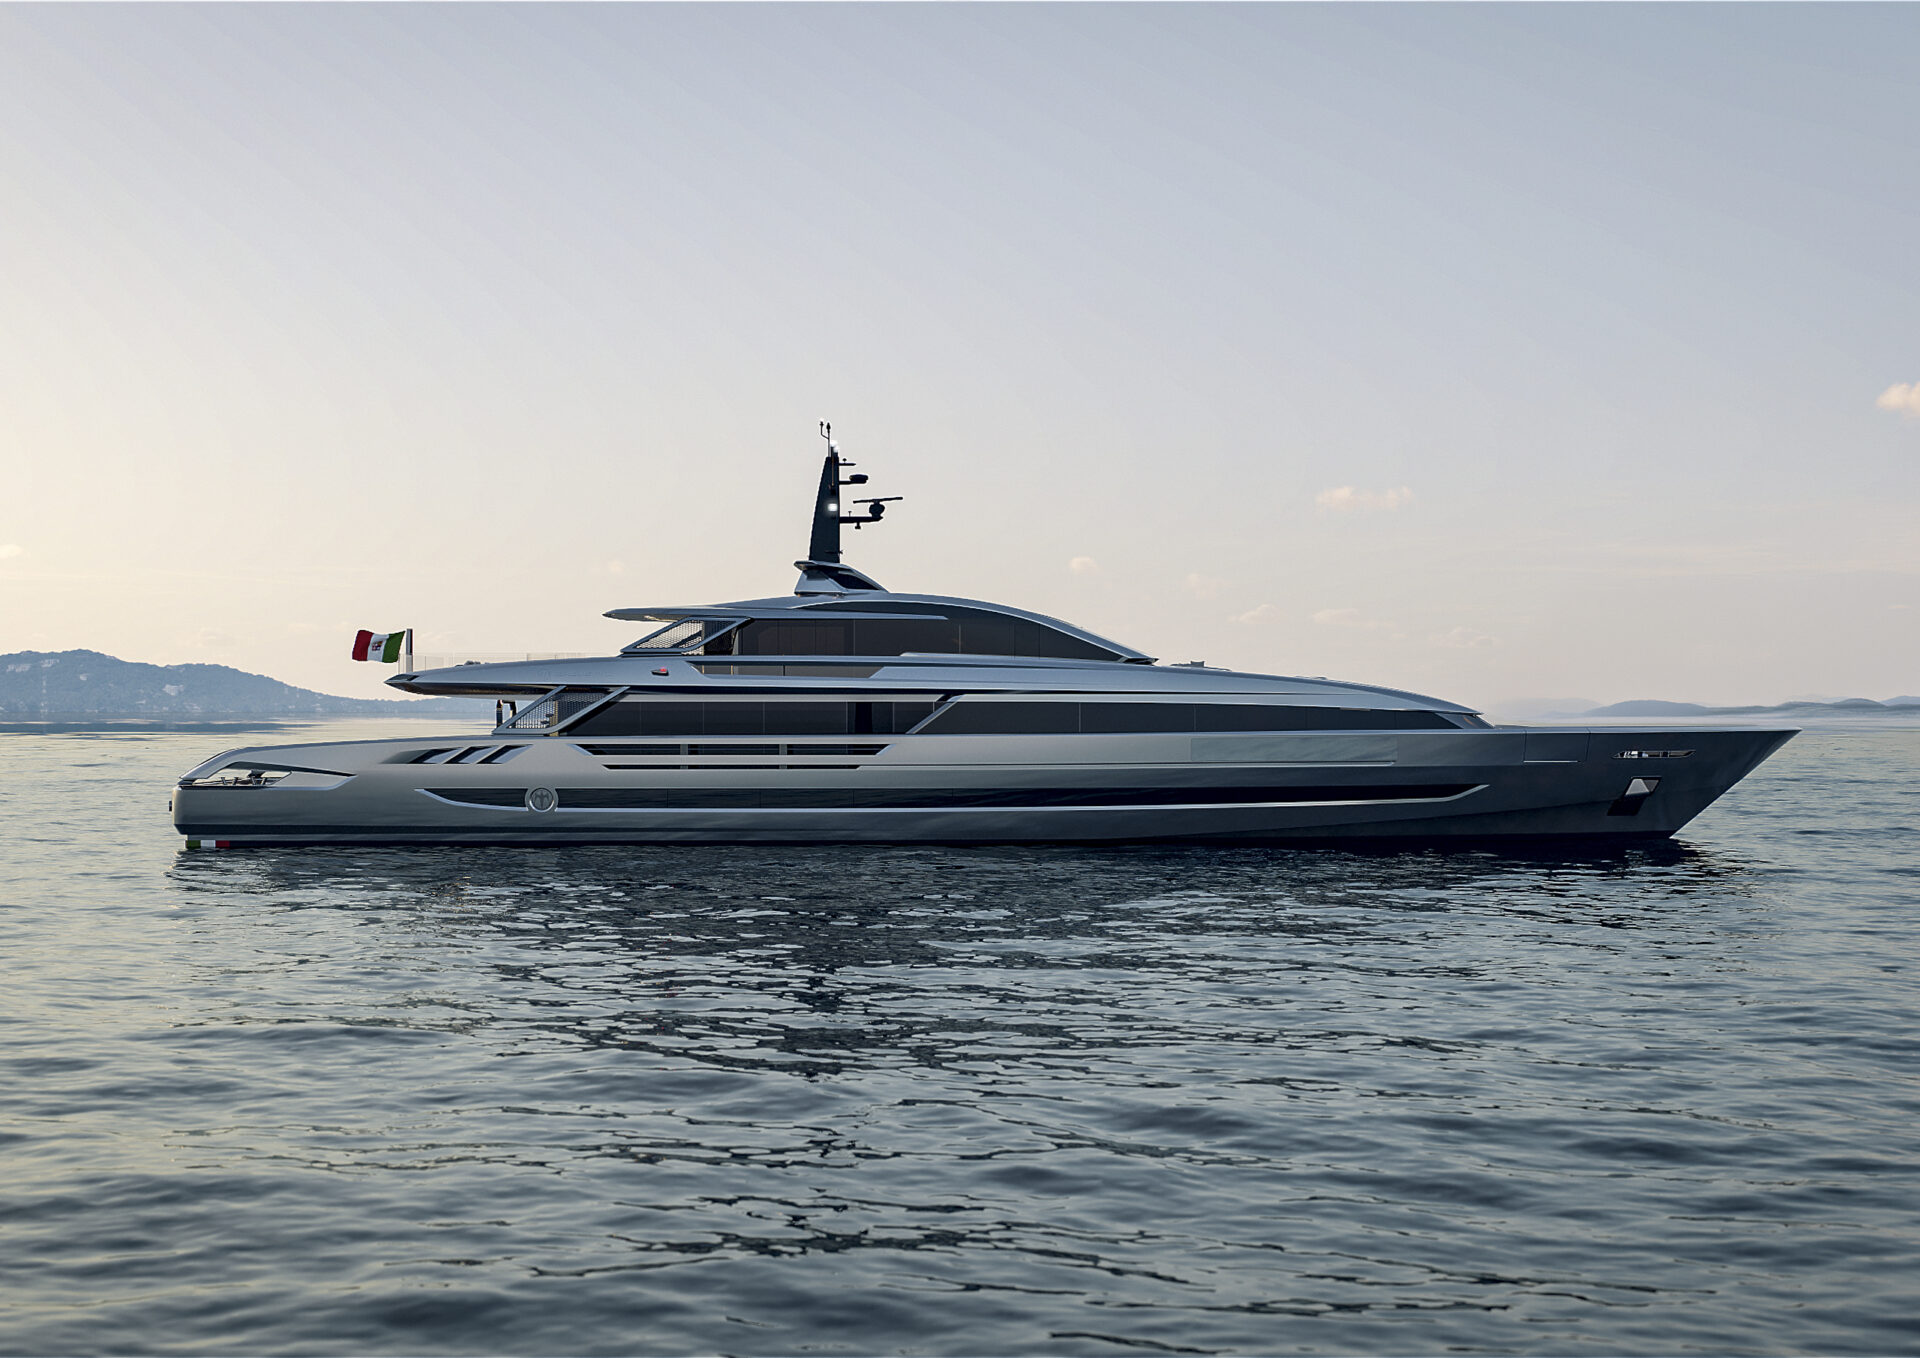 Baglietto announces the sale of the first unit of its FAST 50 yacht, designed by Francesco Paszkowski and Margherita Casprini, combining high performance with timeless elegance.